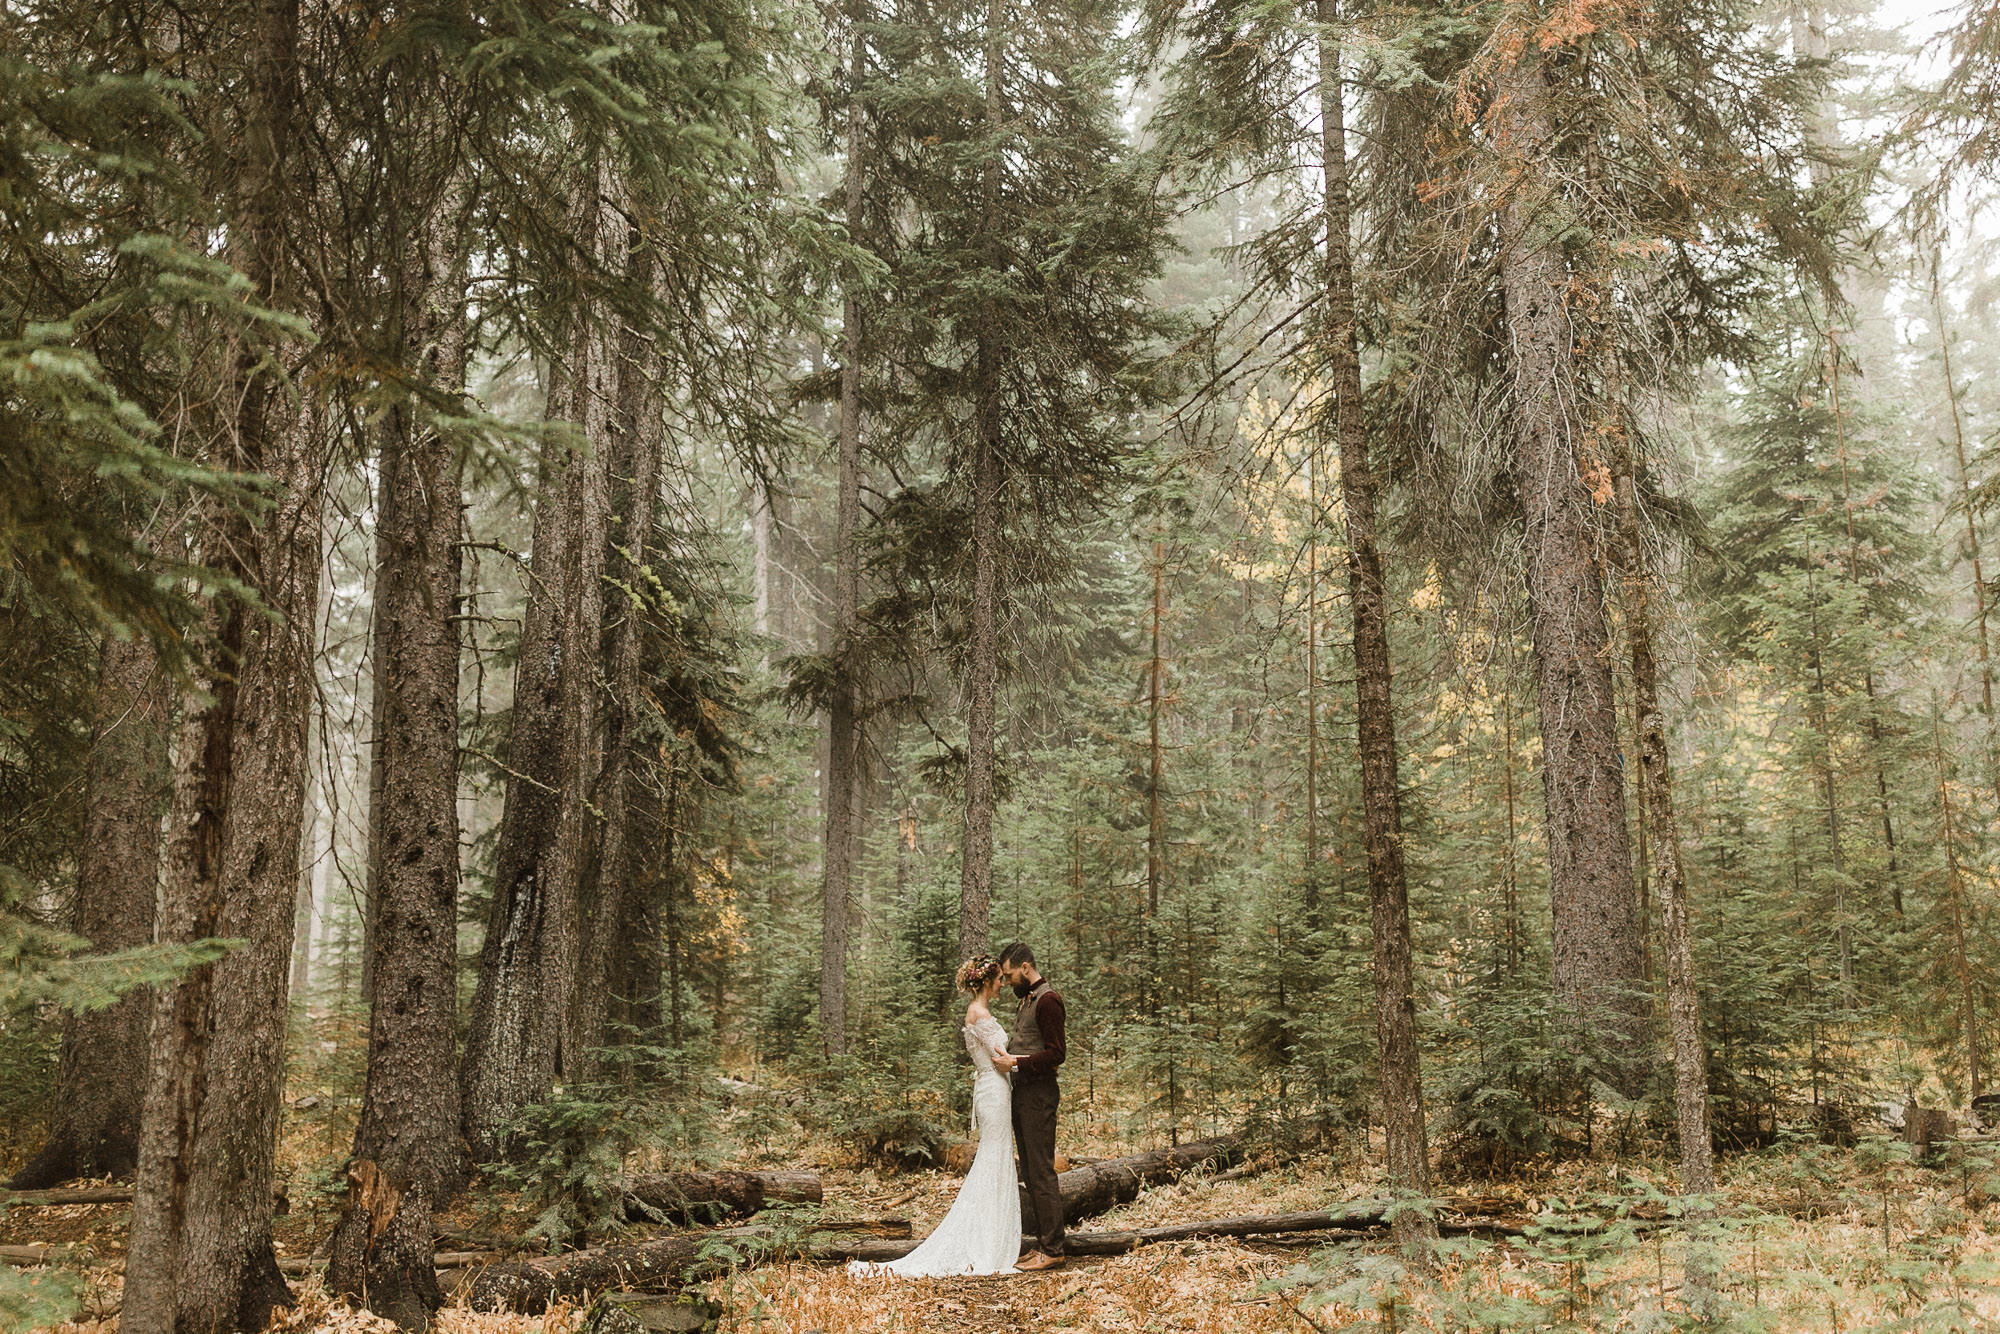 Bride and groom pose in the forest at a venue in Bend, Oregon